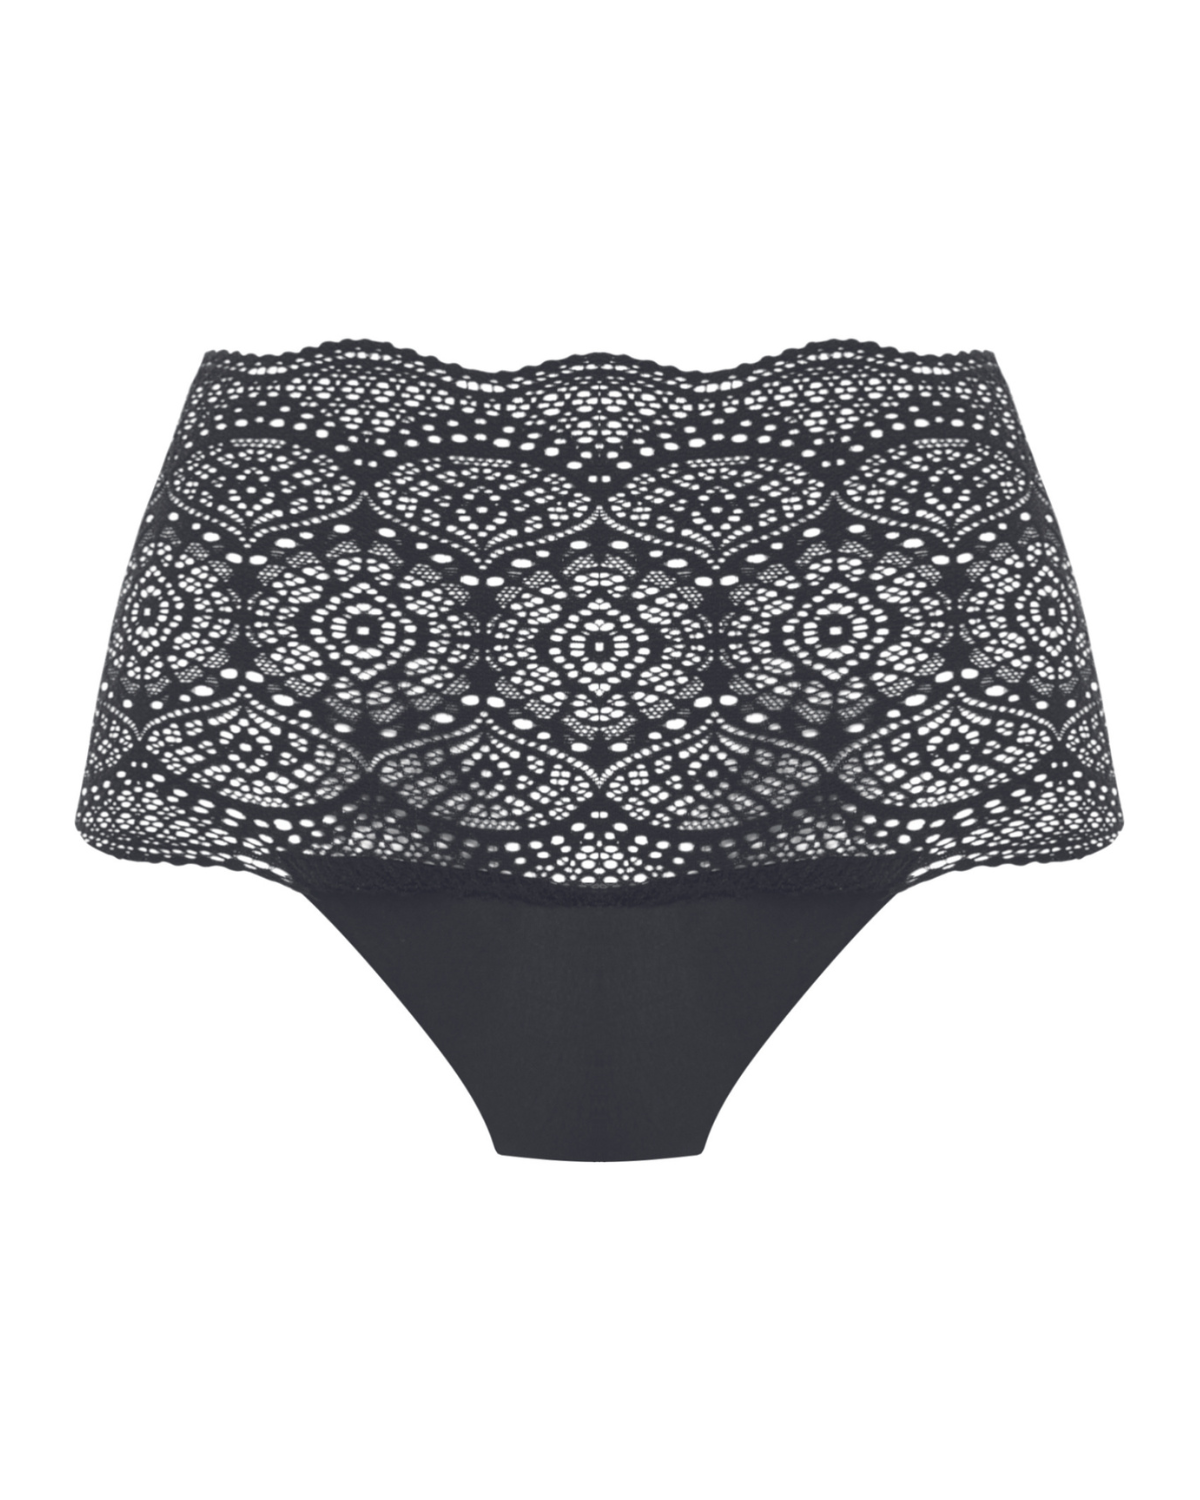 Flat lay of a wide lace band brief panty in black